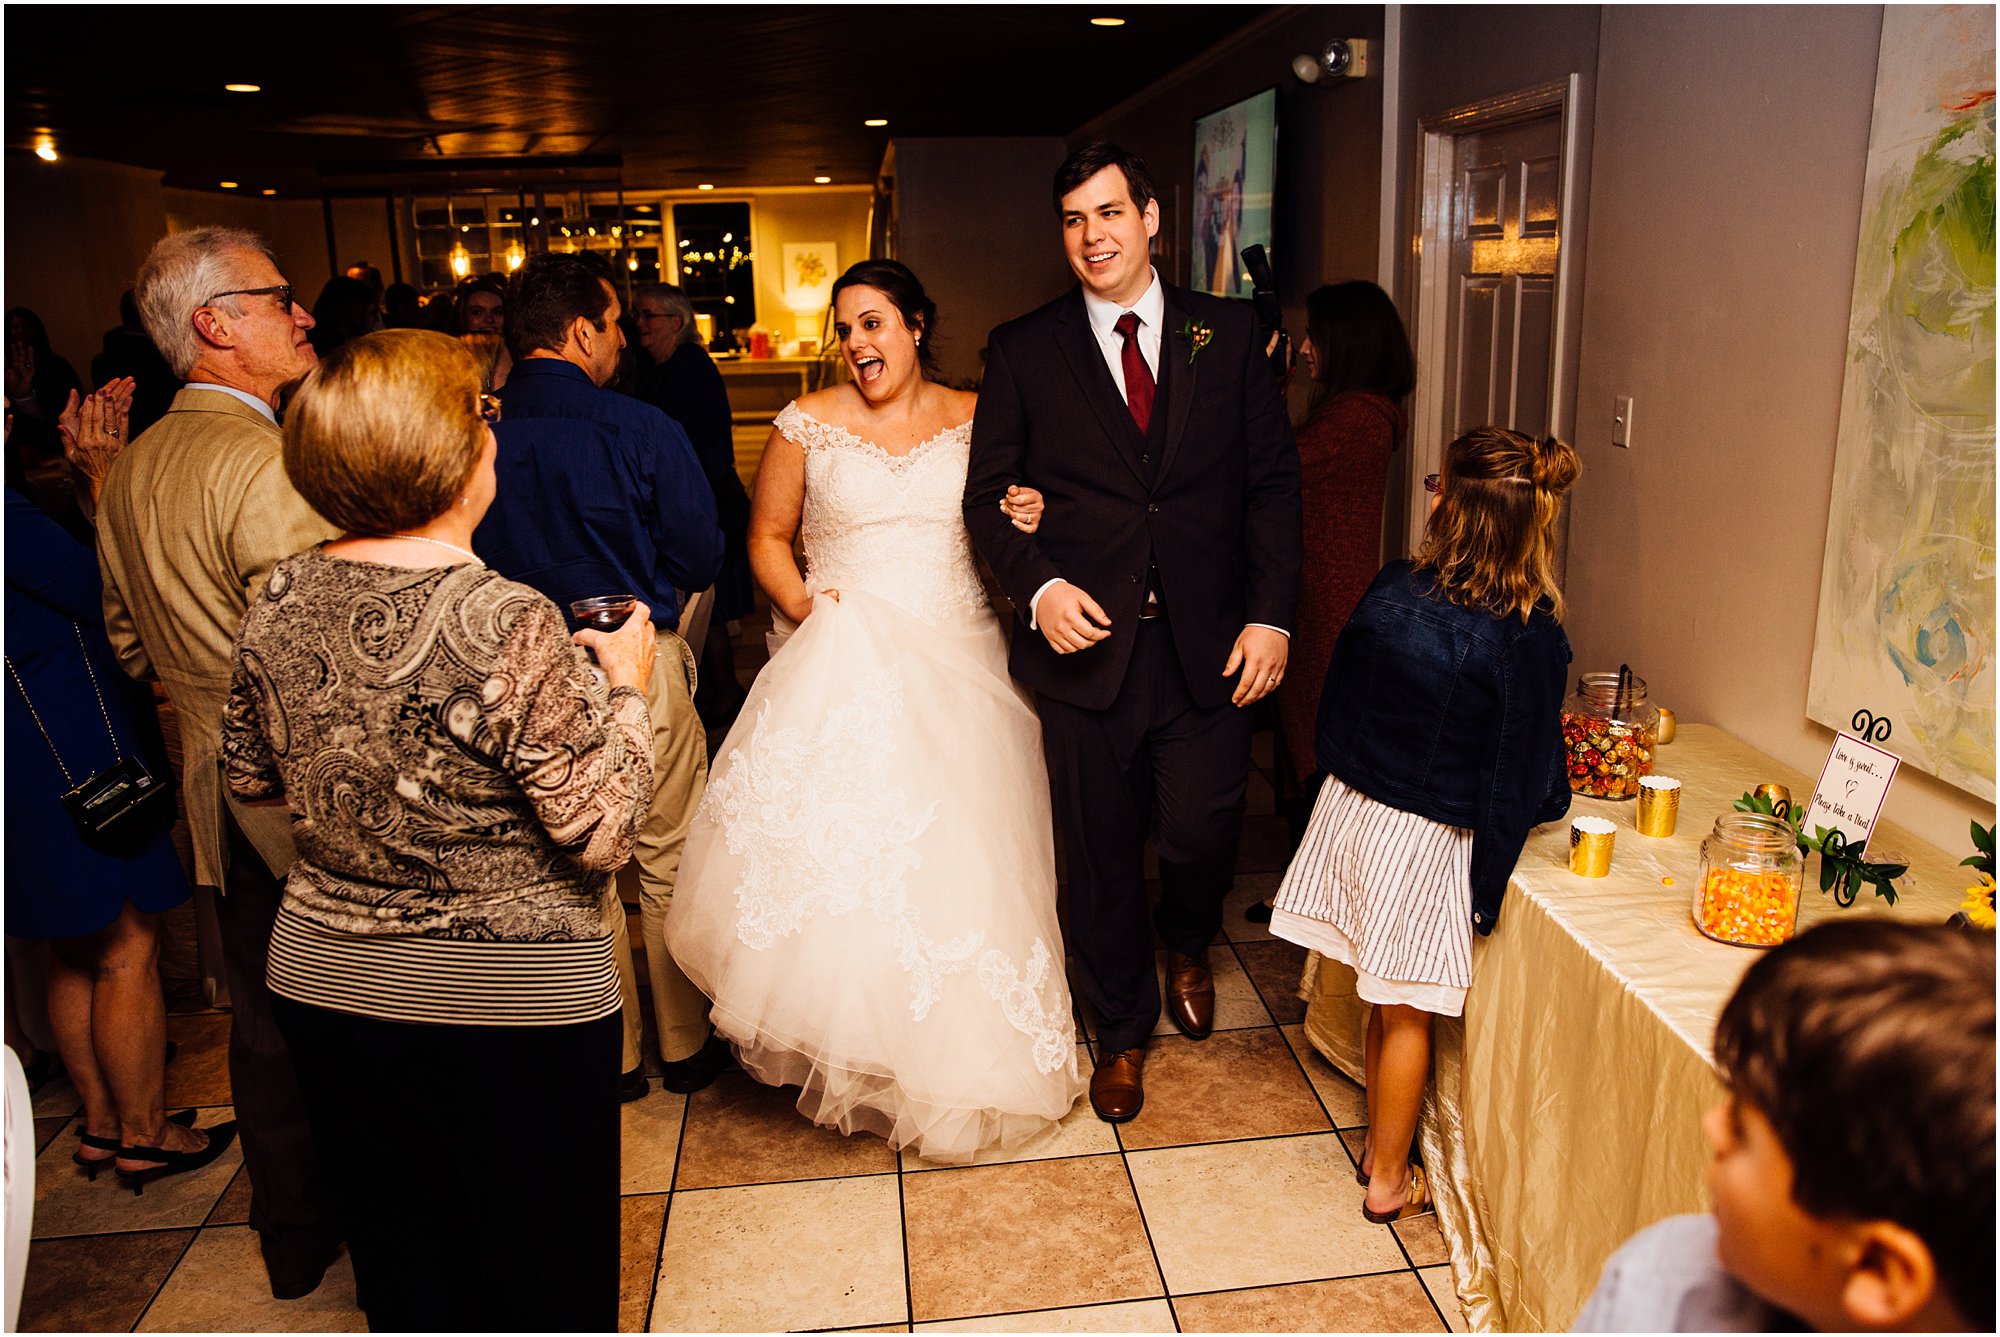 Lauren and Kevin entering their reception at Club Windward in Memphis, TN